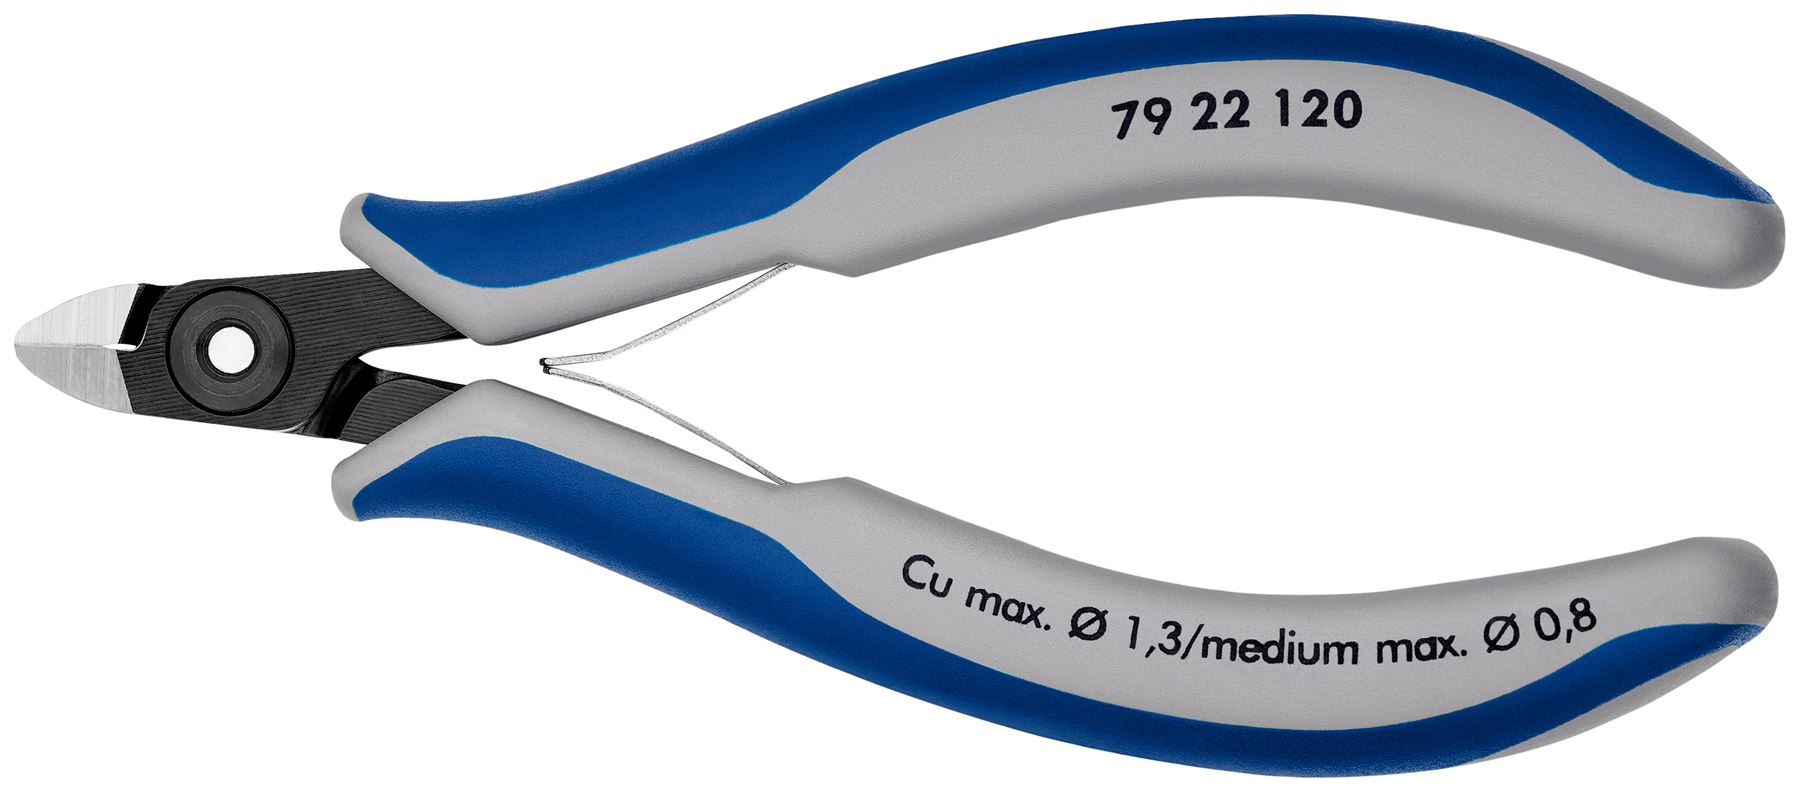 KNIPEX Precision Electronics Diagonal Cutter Cutting Pliers 120mm Multi Component Grips 79 22 120